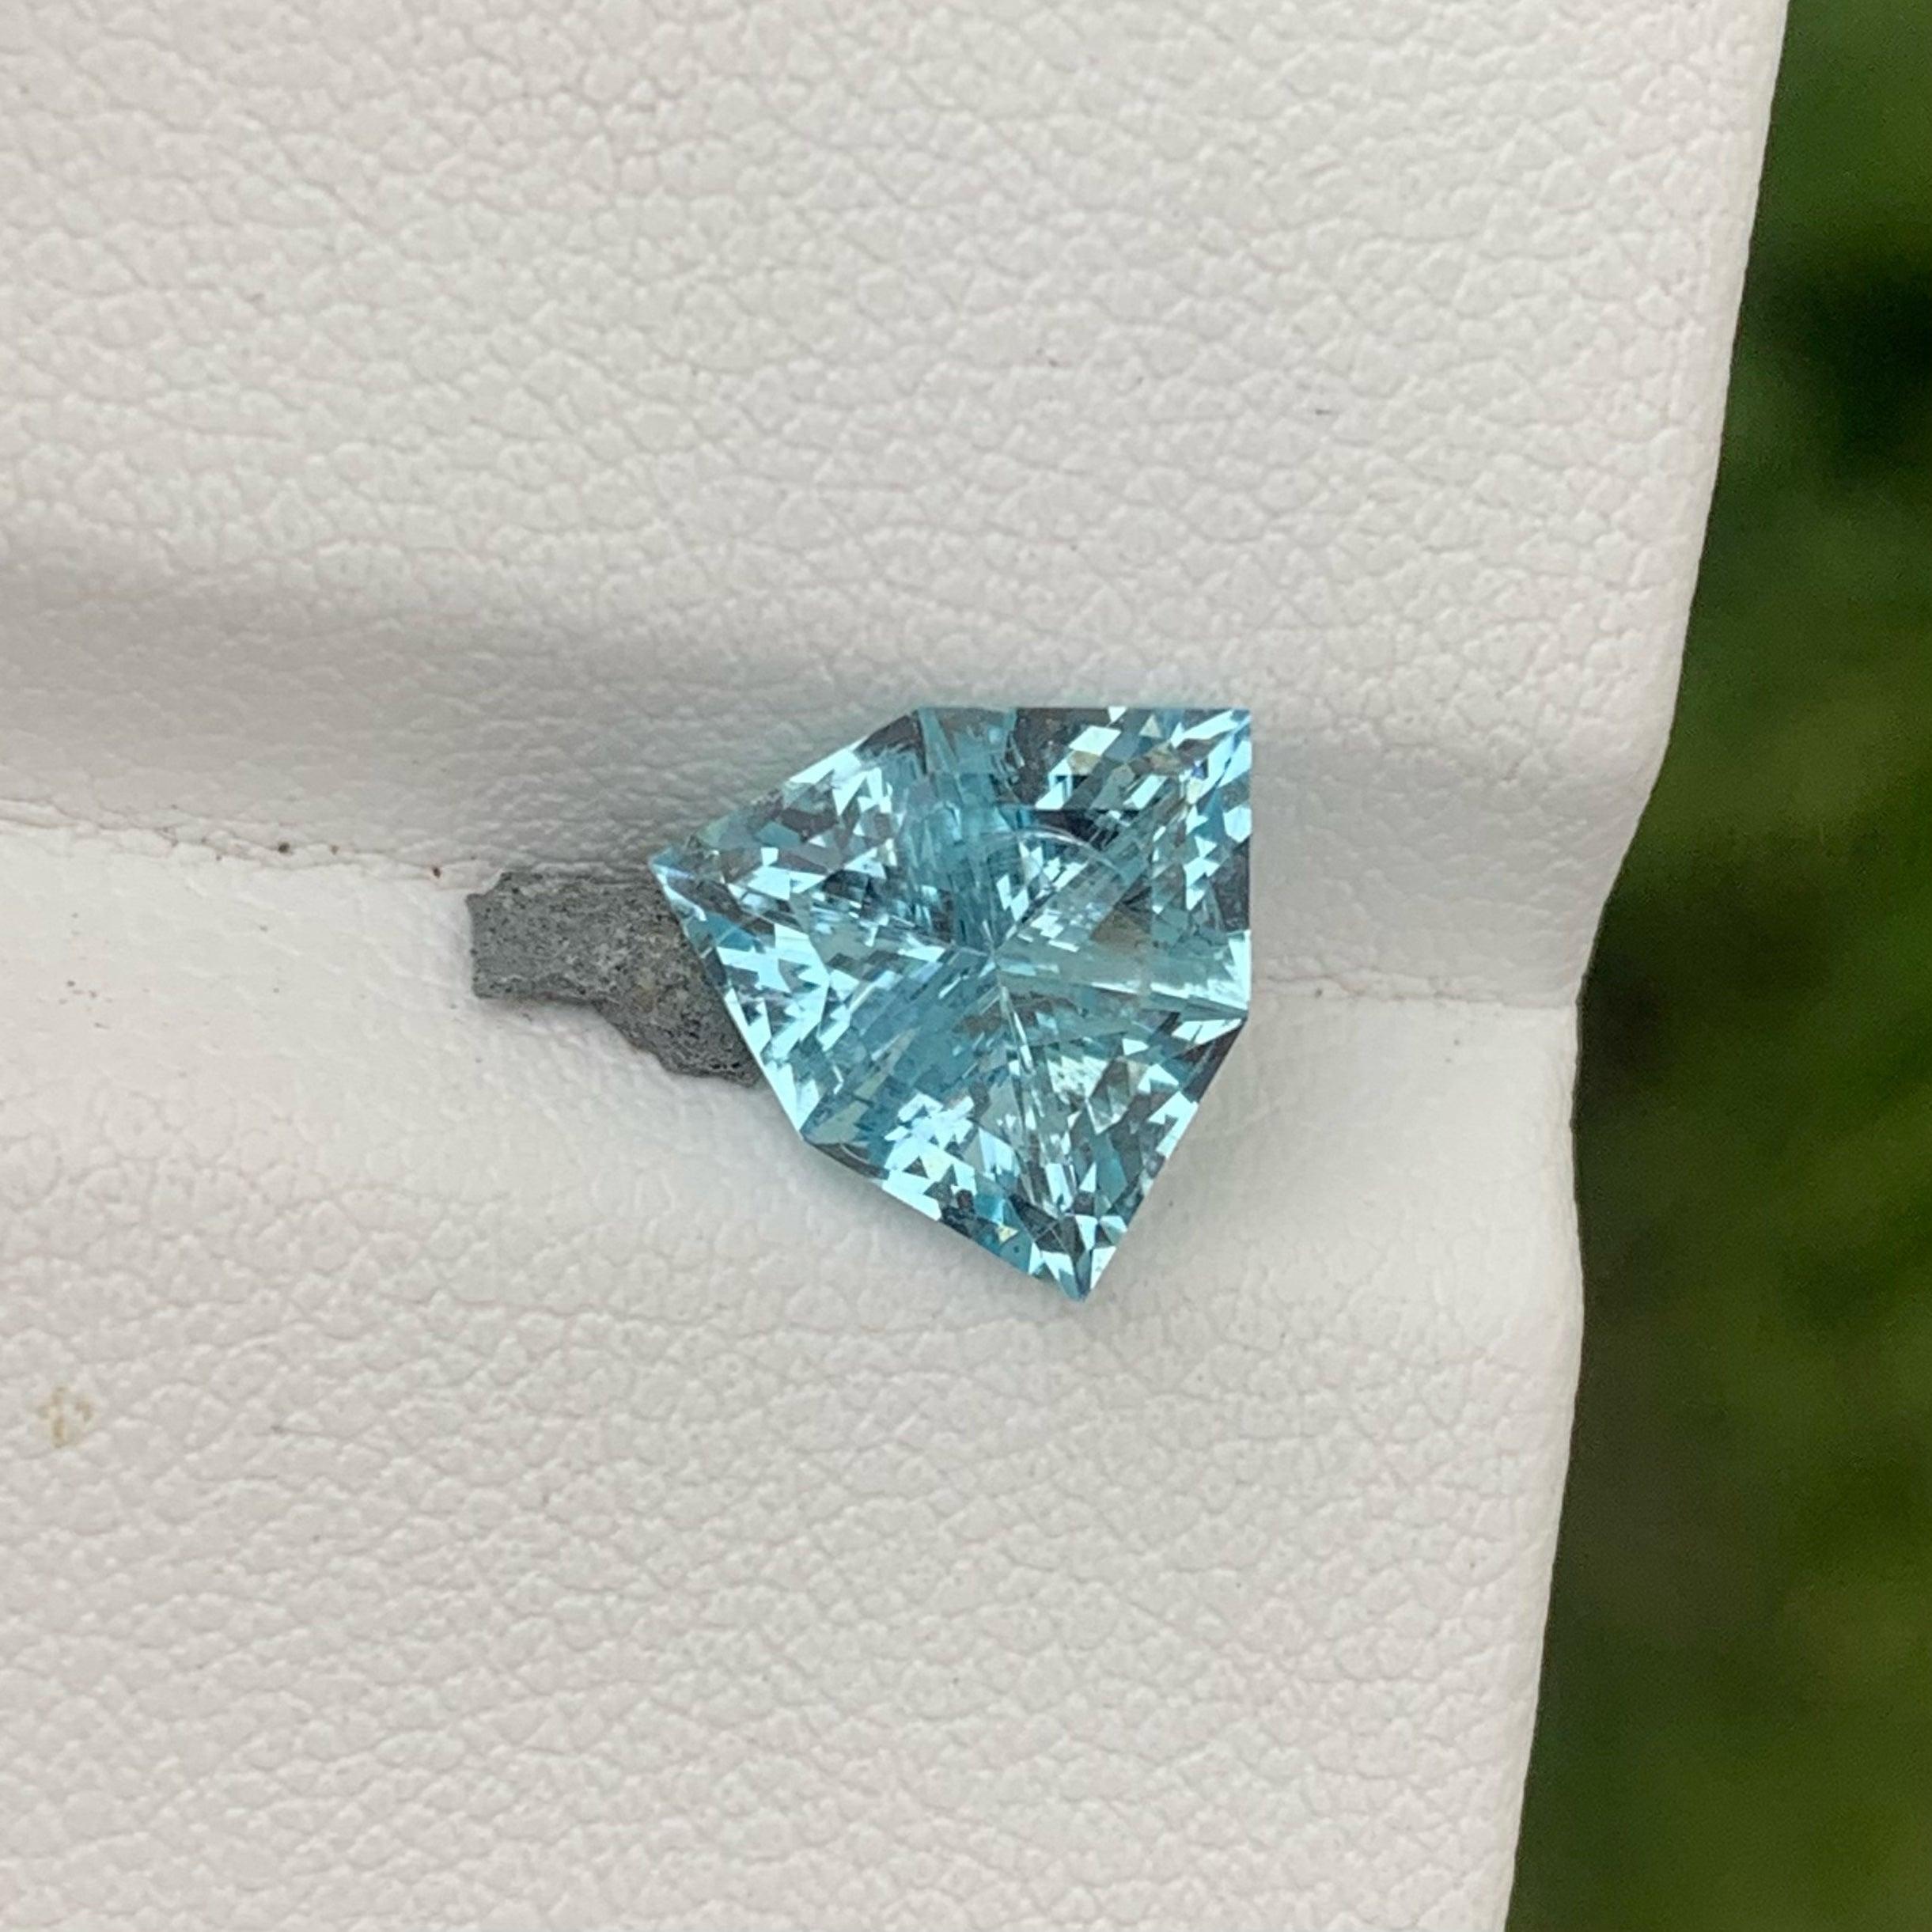 Lovely Natural Aquamarine Cut Stone, available for sale at wholesale price natural high quality, 2.50 carats, SI Clarity Certified  Aquamarine from Madagascar.

Product Information:
GEMSTONE NAME: Lovely Natural Aquamarine Cut Stone
WEIGHT: 2.50